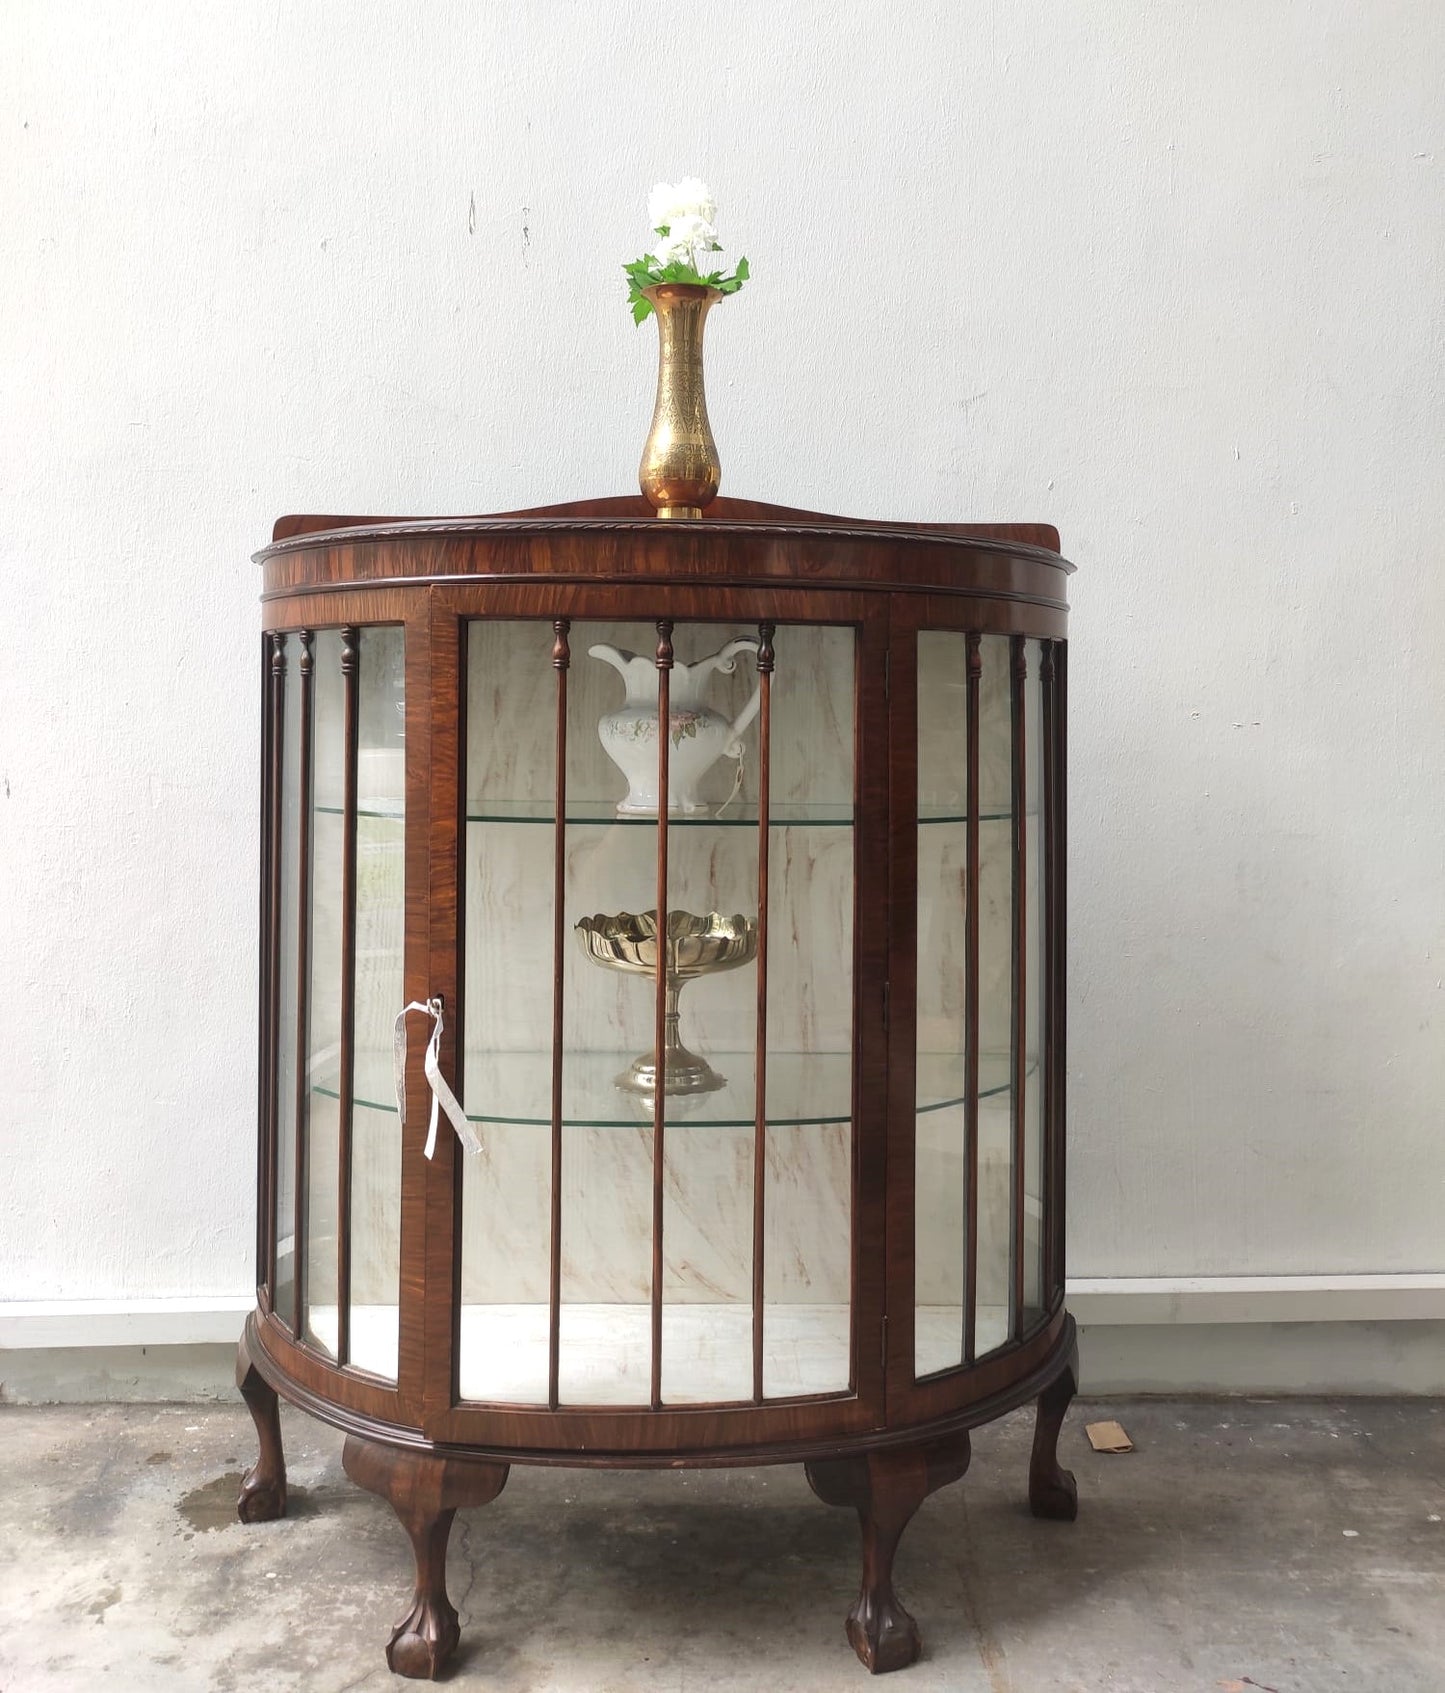 1900-1910 Bow front Mahogany Display cabinet with Ball Claw feet